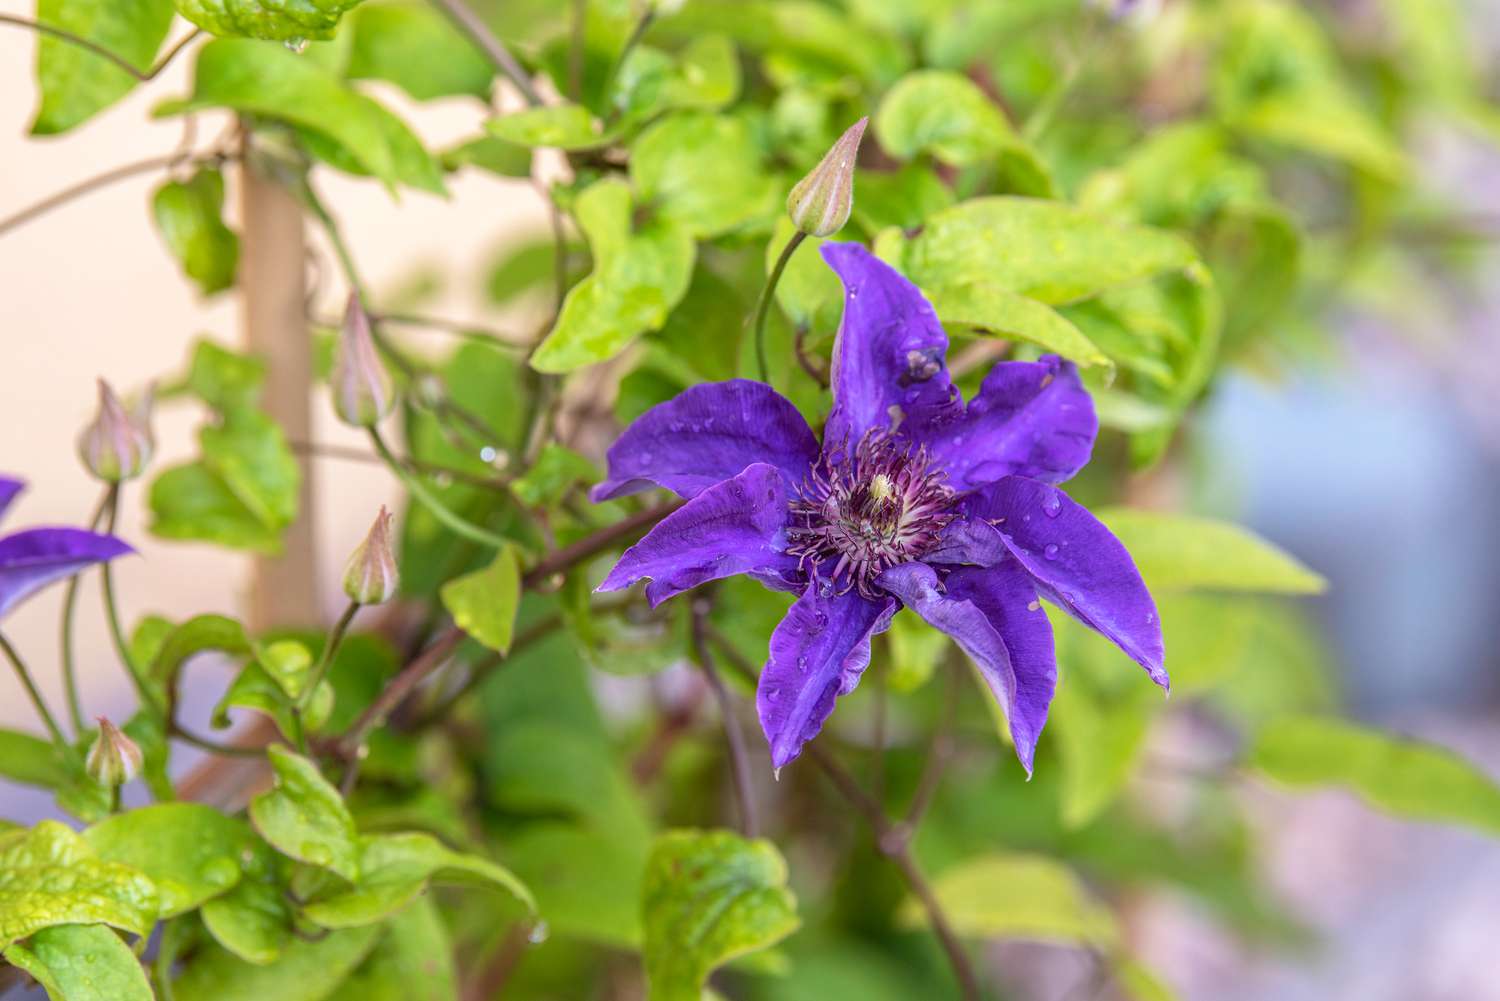 Clematis 'The President' plant with violet-blue flower with reddish anthers in center growing on vine